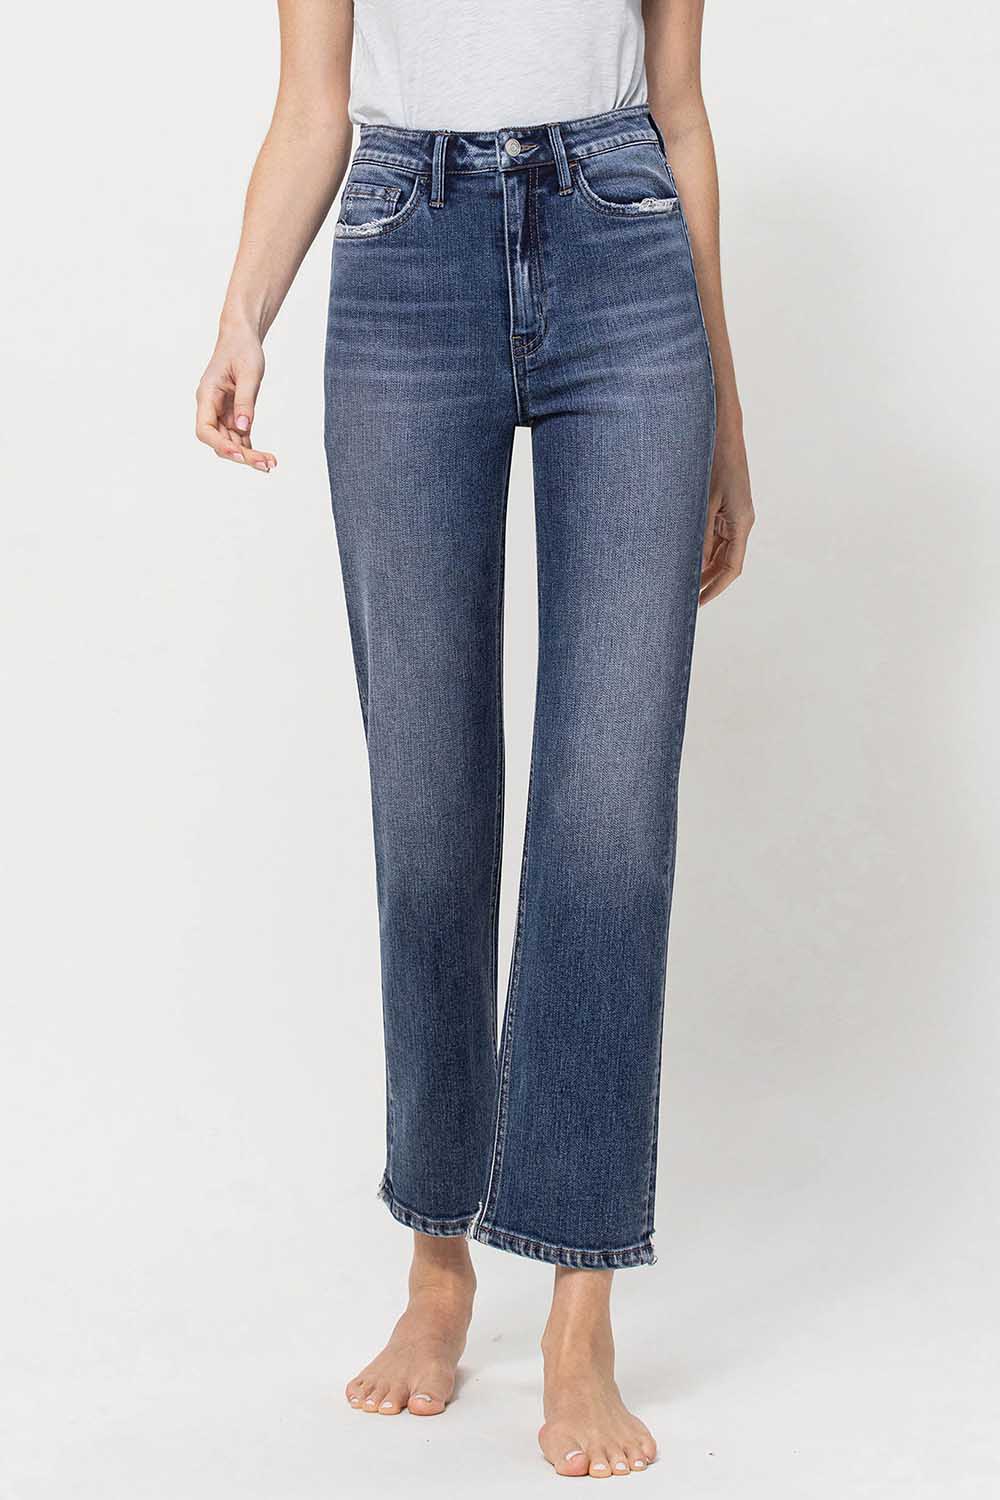 flying-monkey-jeans-high-rise-ankle-straight-jeans